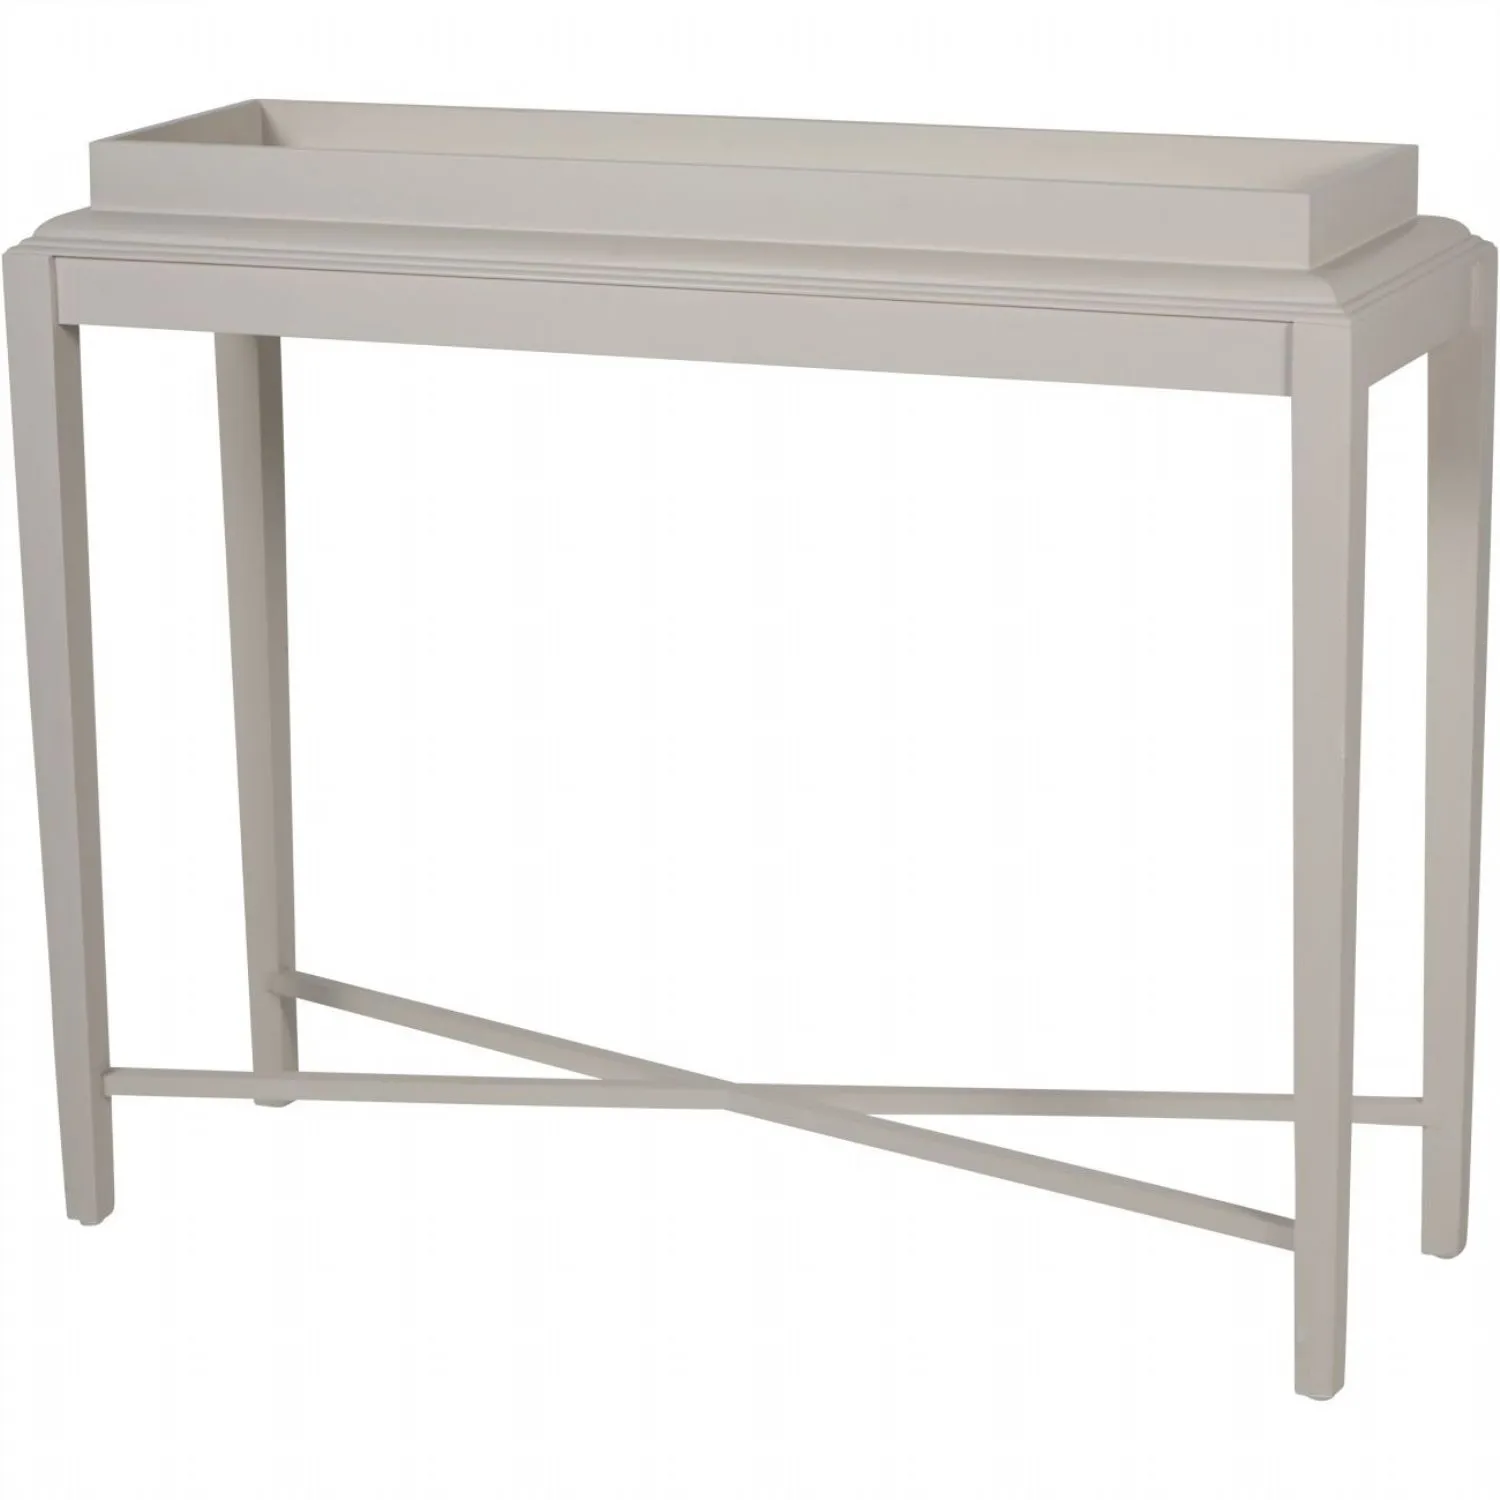 Laura Ashley Dove Grey Painted Console Hall Table